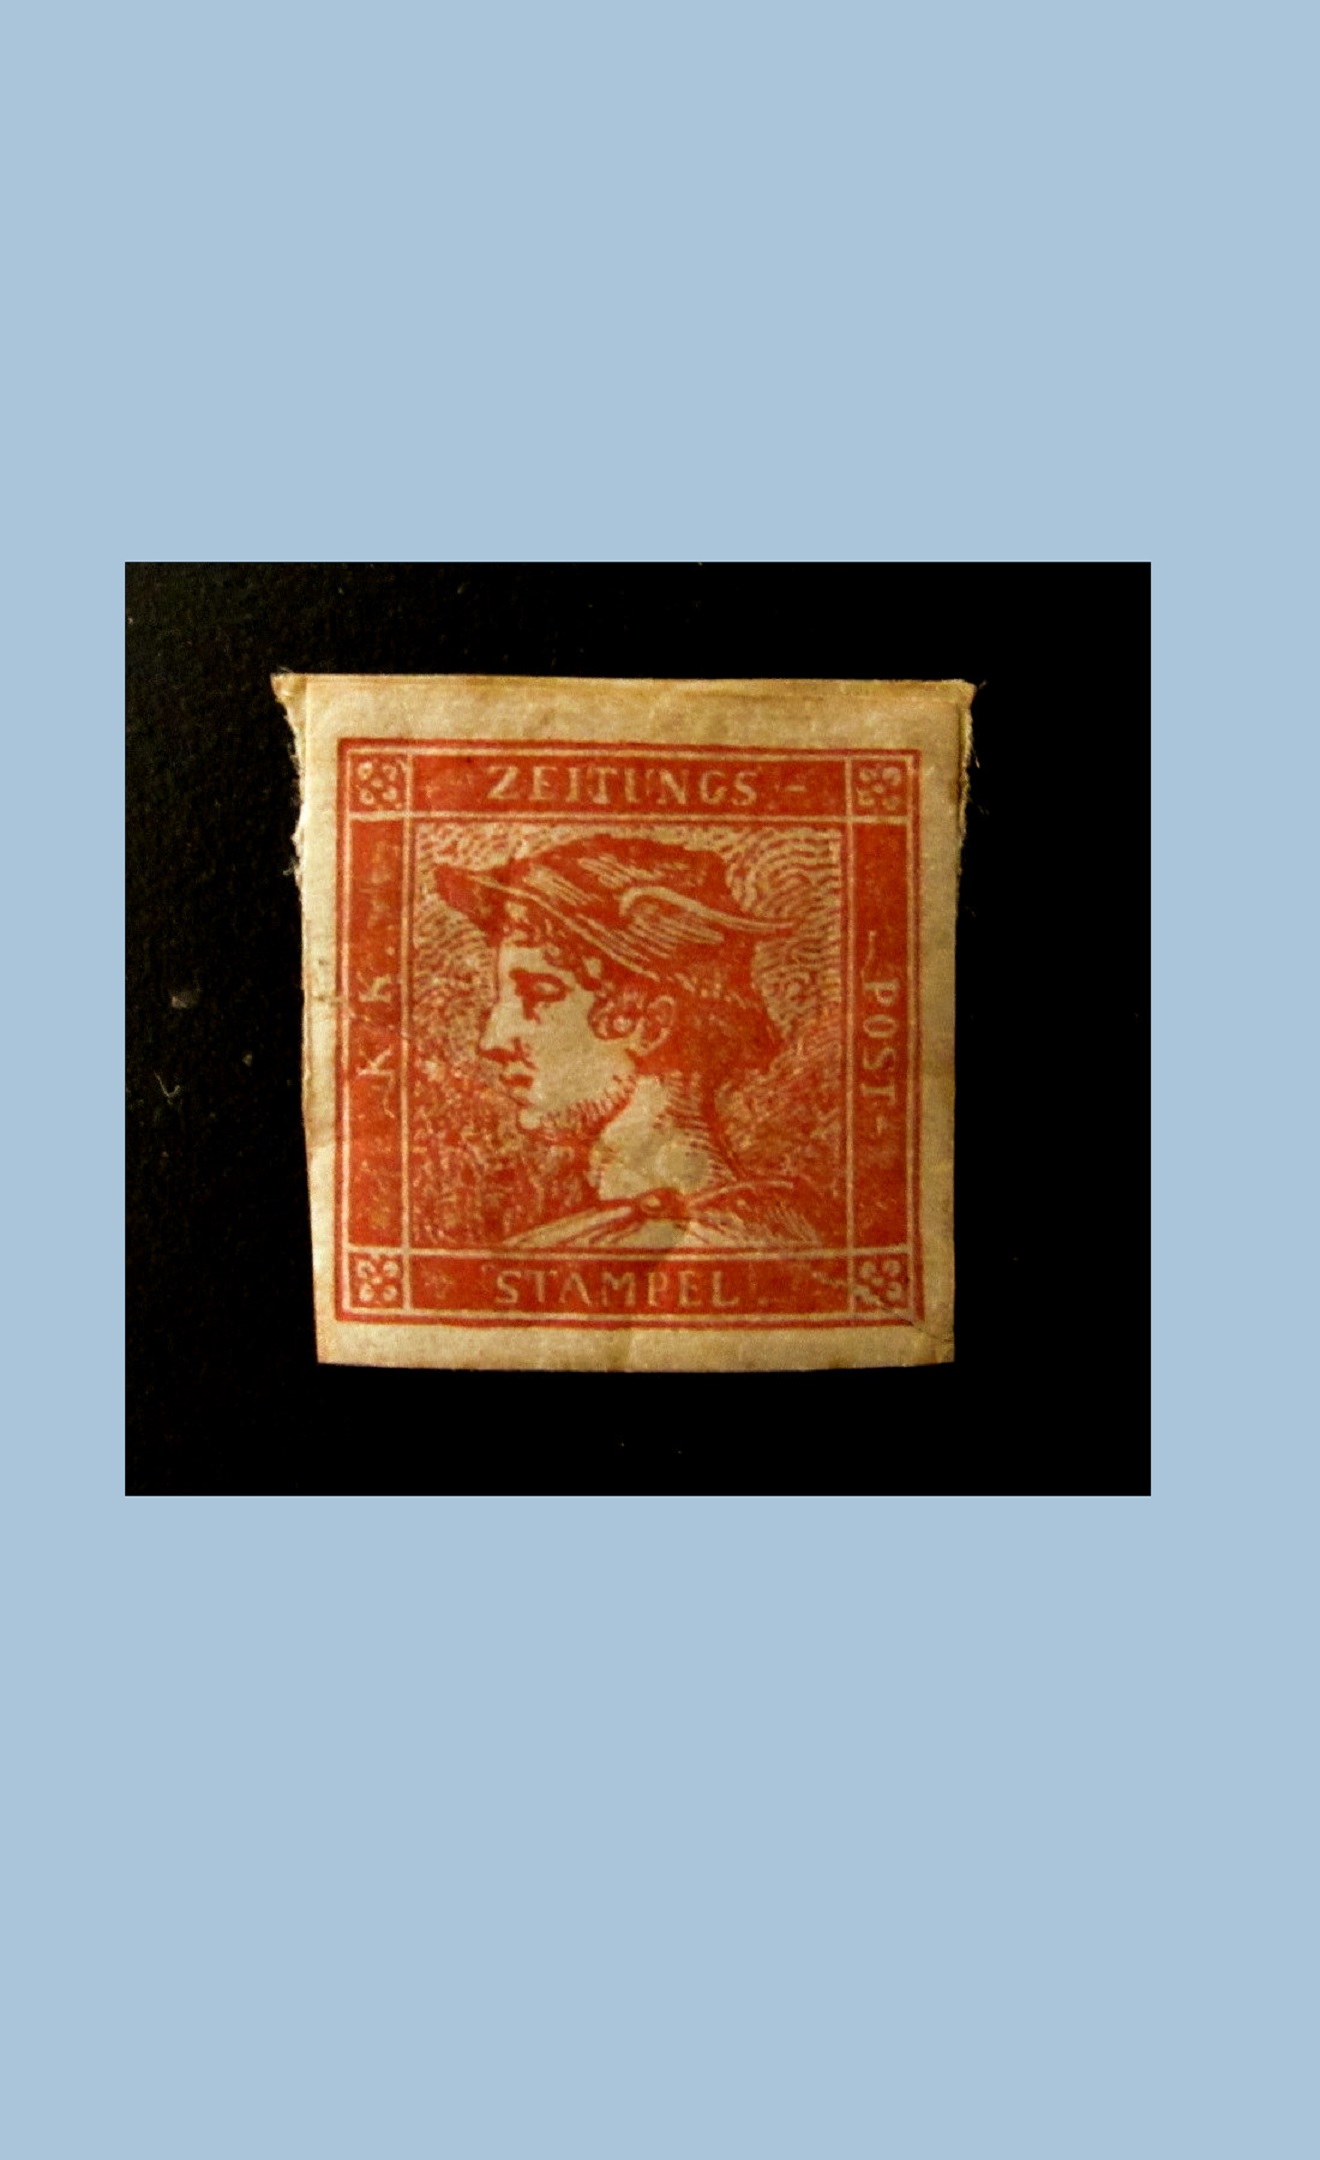 Red Mercury Postage Stamp 1856 | The Rarest Stamp in Europe